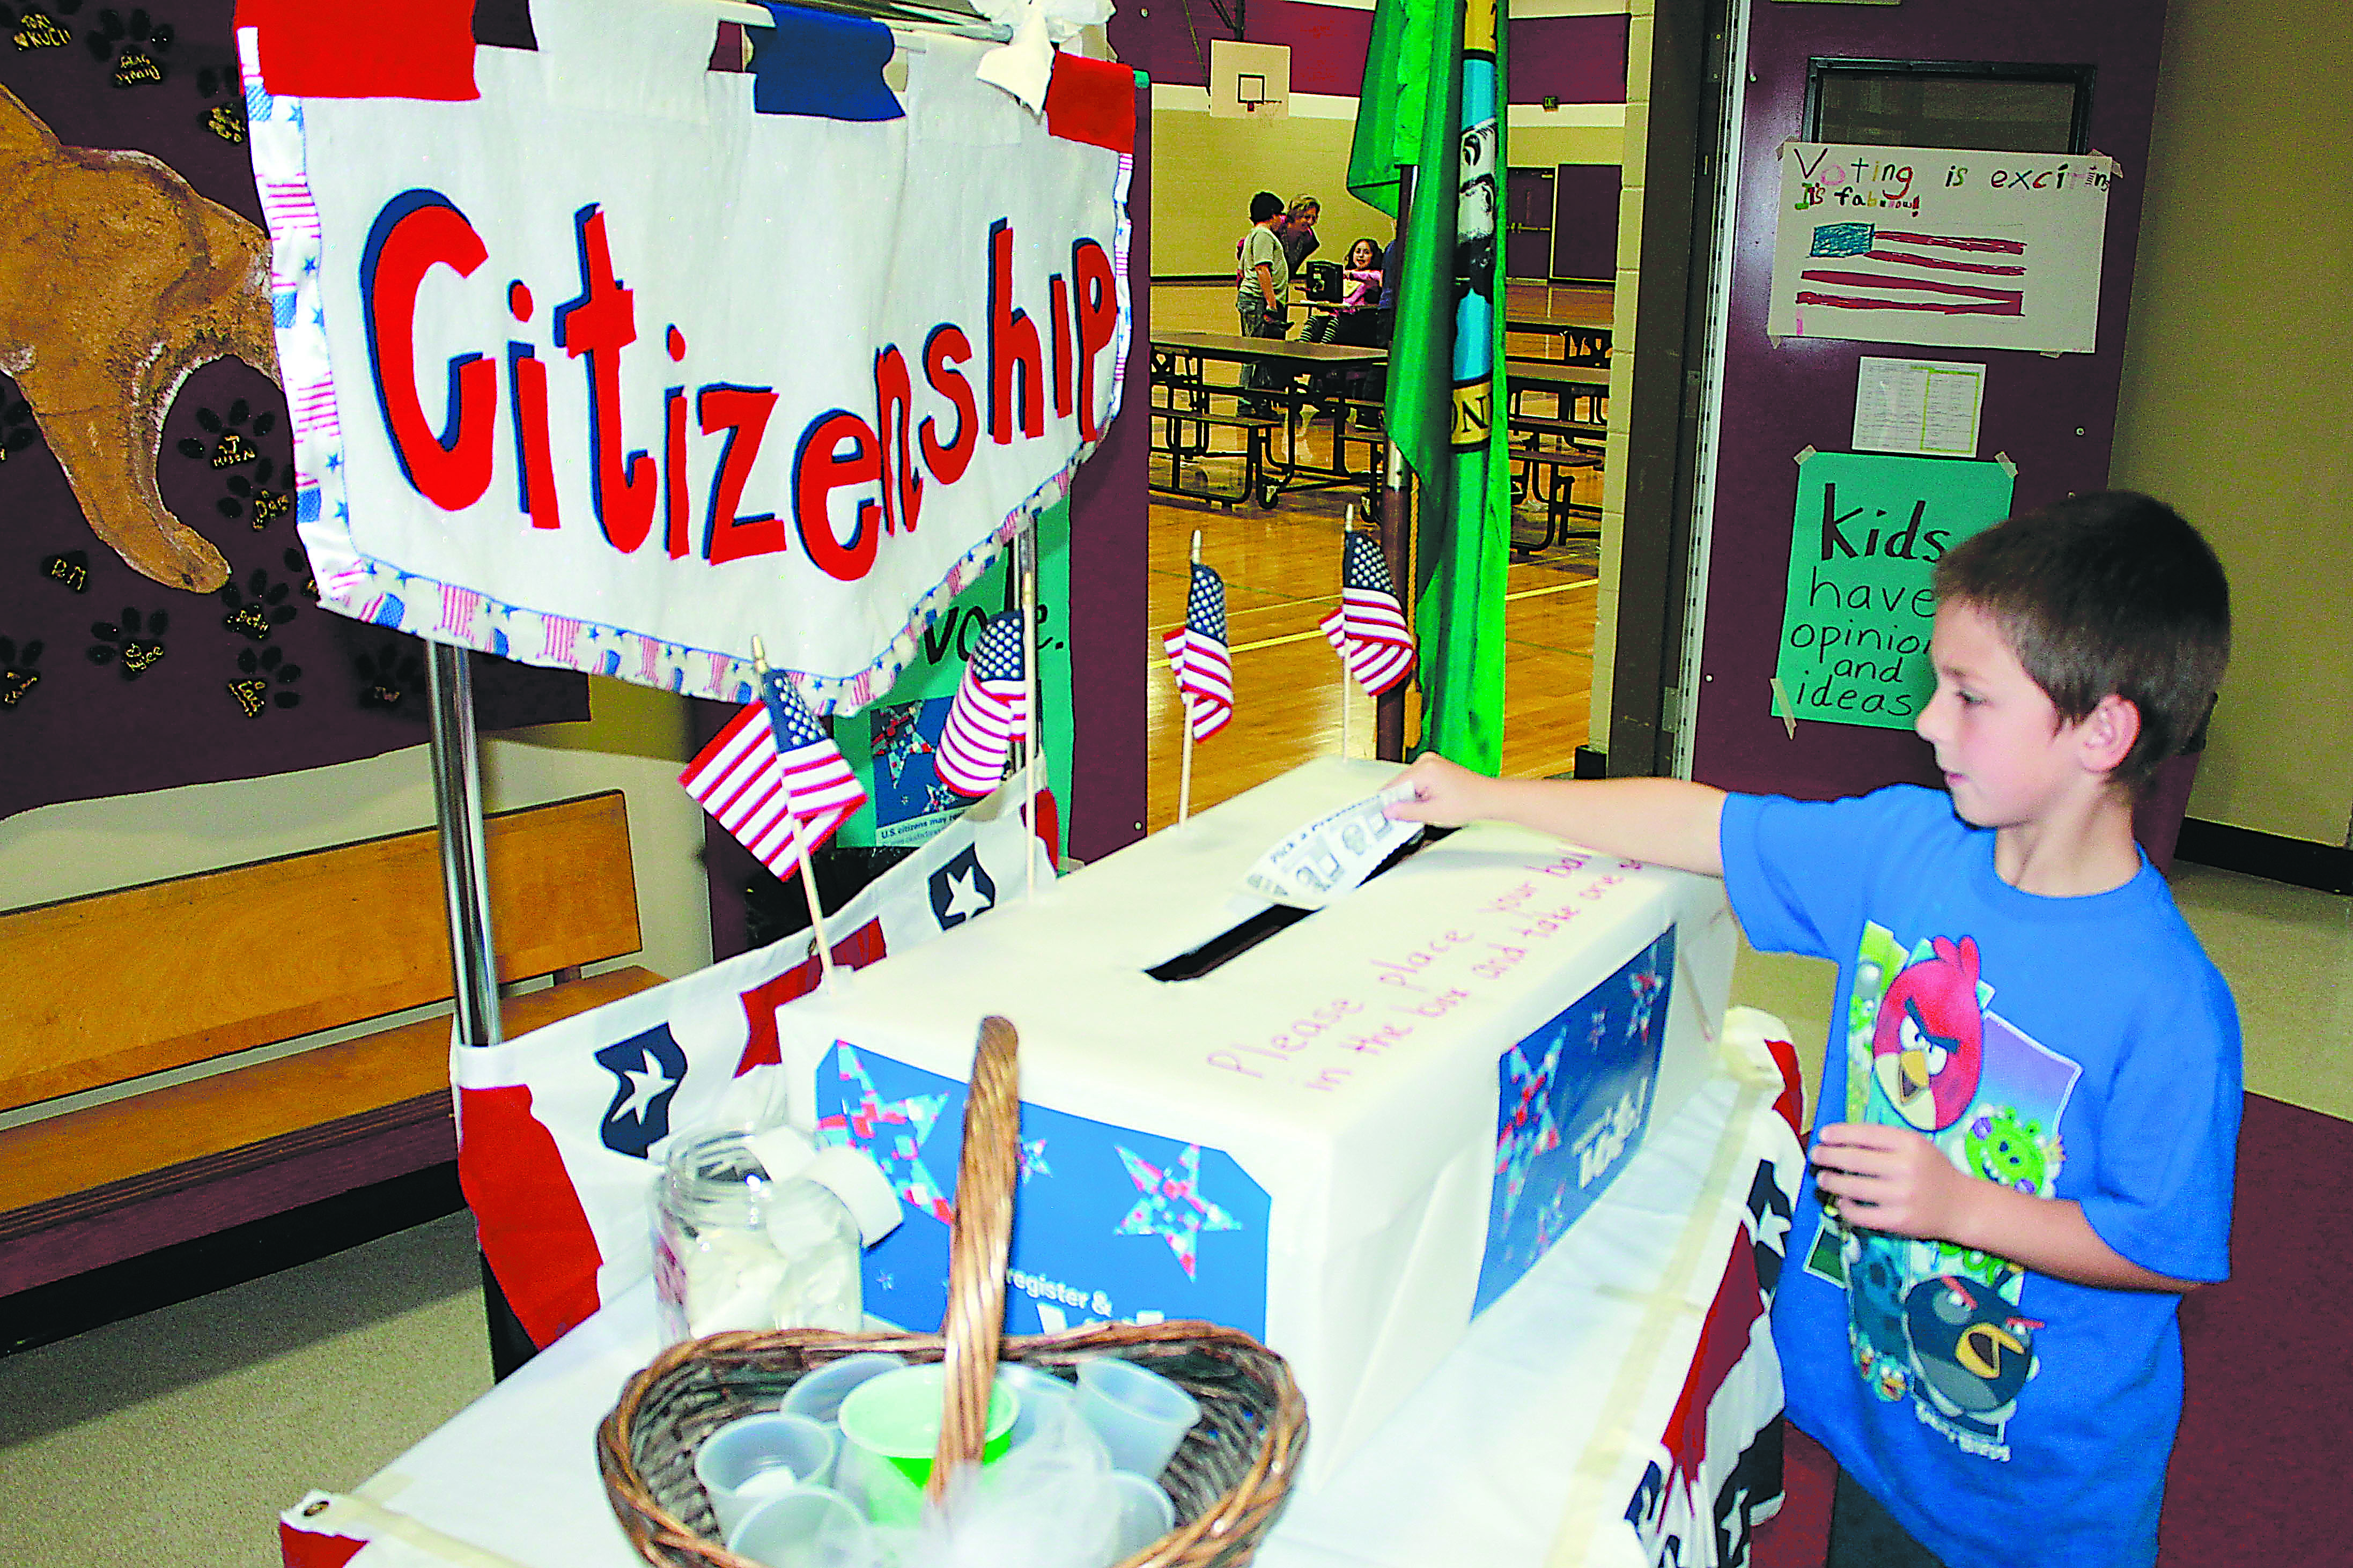 Second-grader David Zinn casts his vote Tuesday at Roosevelt Elementary School in Port Angeles. Port Angeles School District